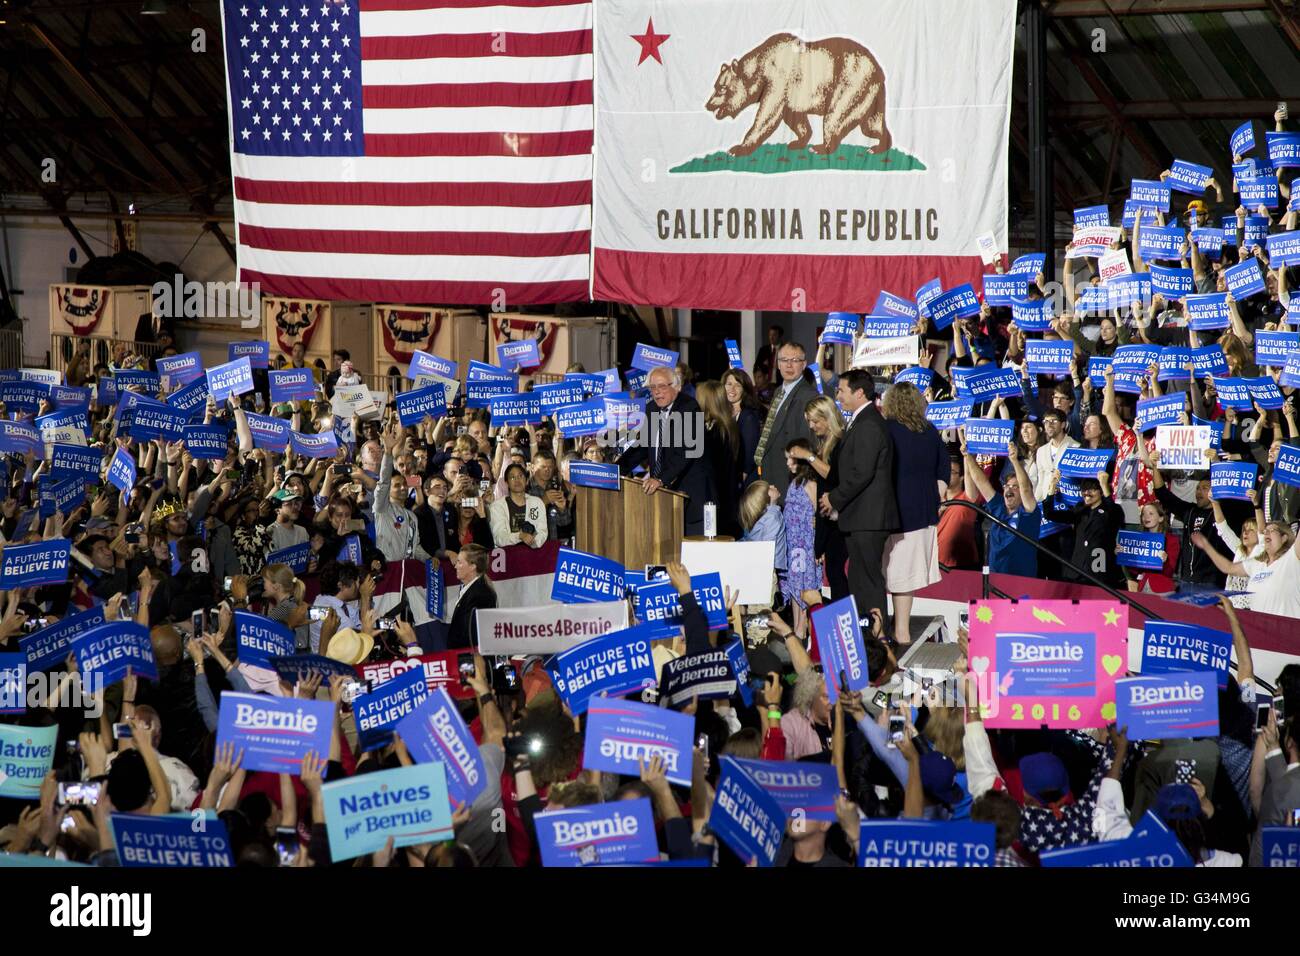 Santa Monica, California, USA. 7th June, 2016. 2016 Democratic Presidential candidate BERNIE SANDERS vows to continue his fight on to the Democratic Convention in Philadelphia during an election night rally in Santa Monica. The full results of the California Primary are still uncertain. Credit:  Mariel Calloway/ZUMA Wire/Alamy Live News Stock Photo